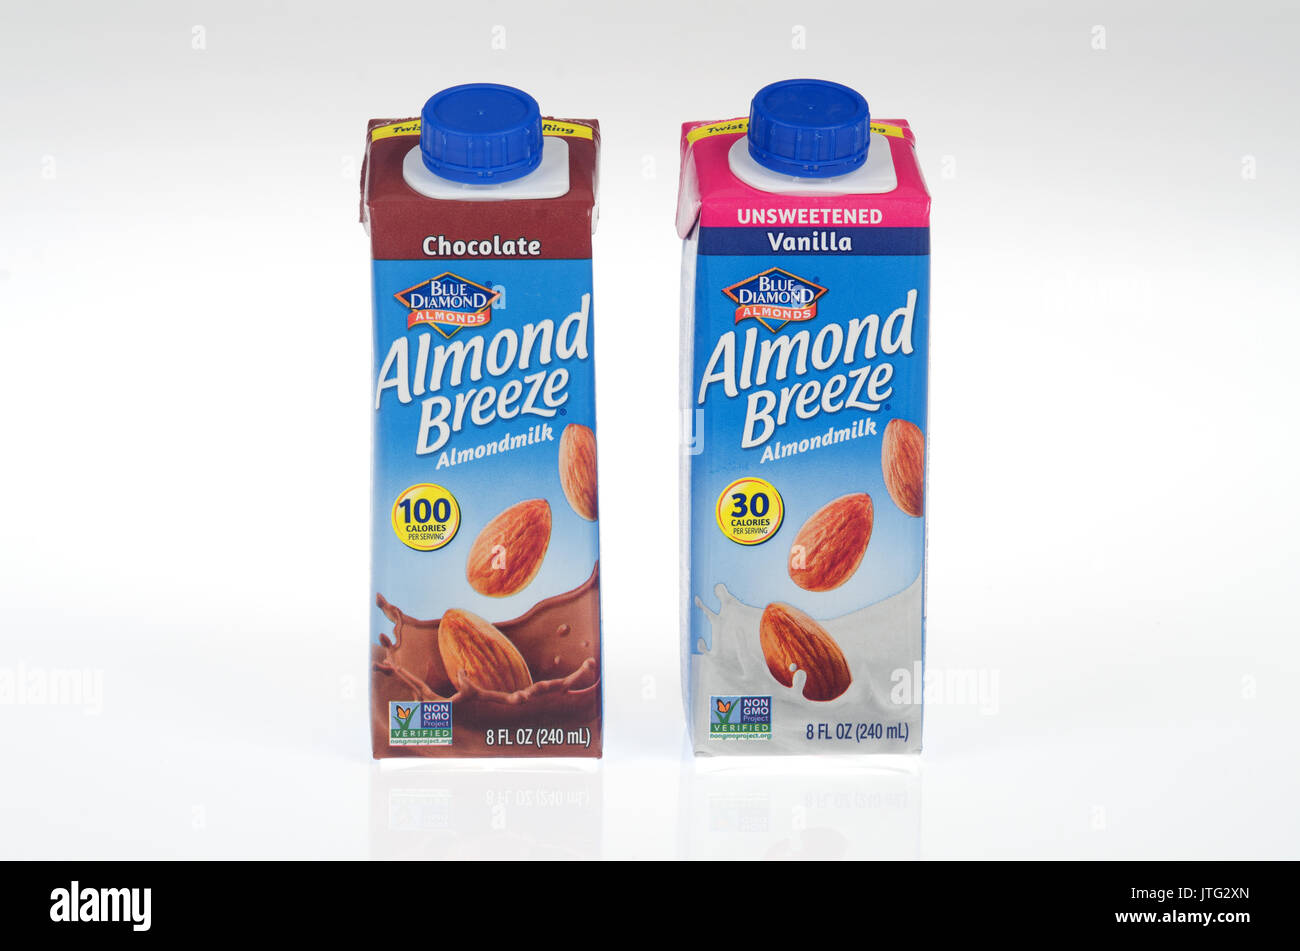 2 cartons of Almond Breeze Almond Milk-1 chocolate and 1 unsweetened vanilla on white background, cut out. USA Stock Photo